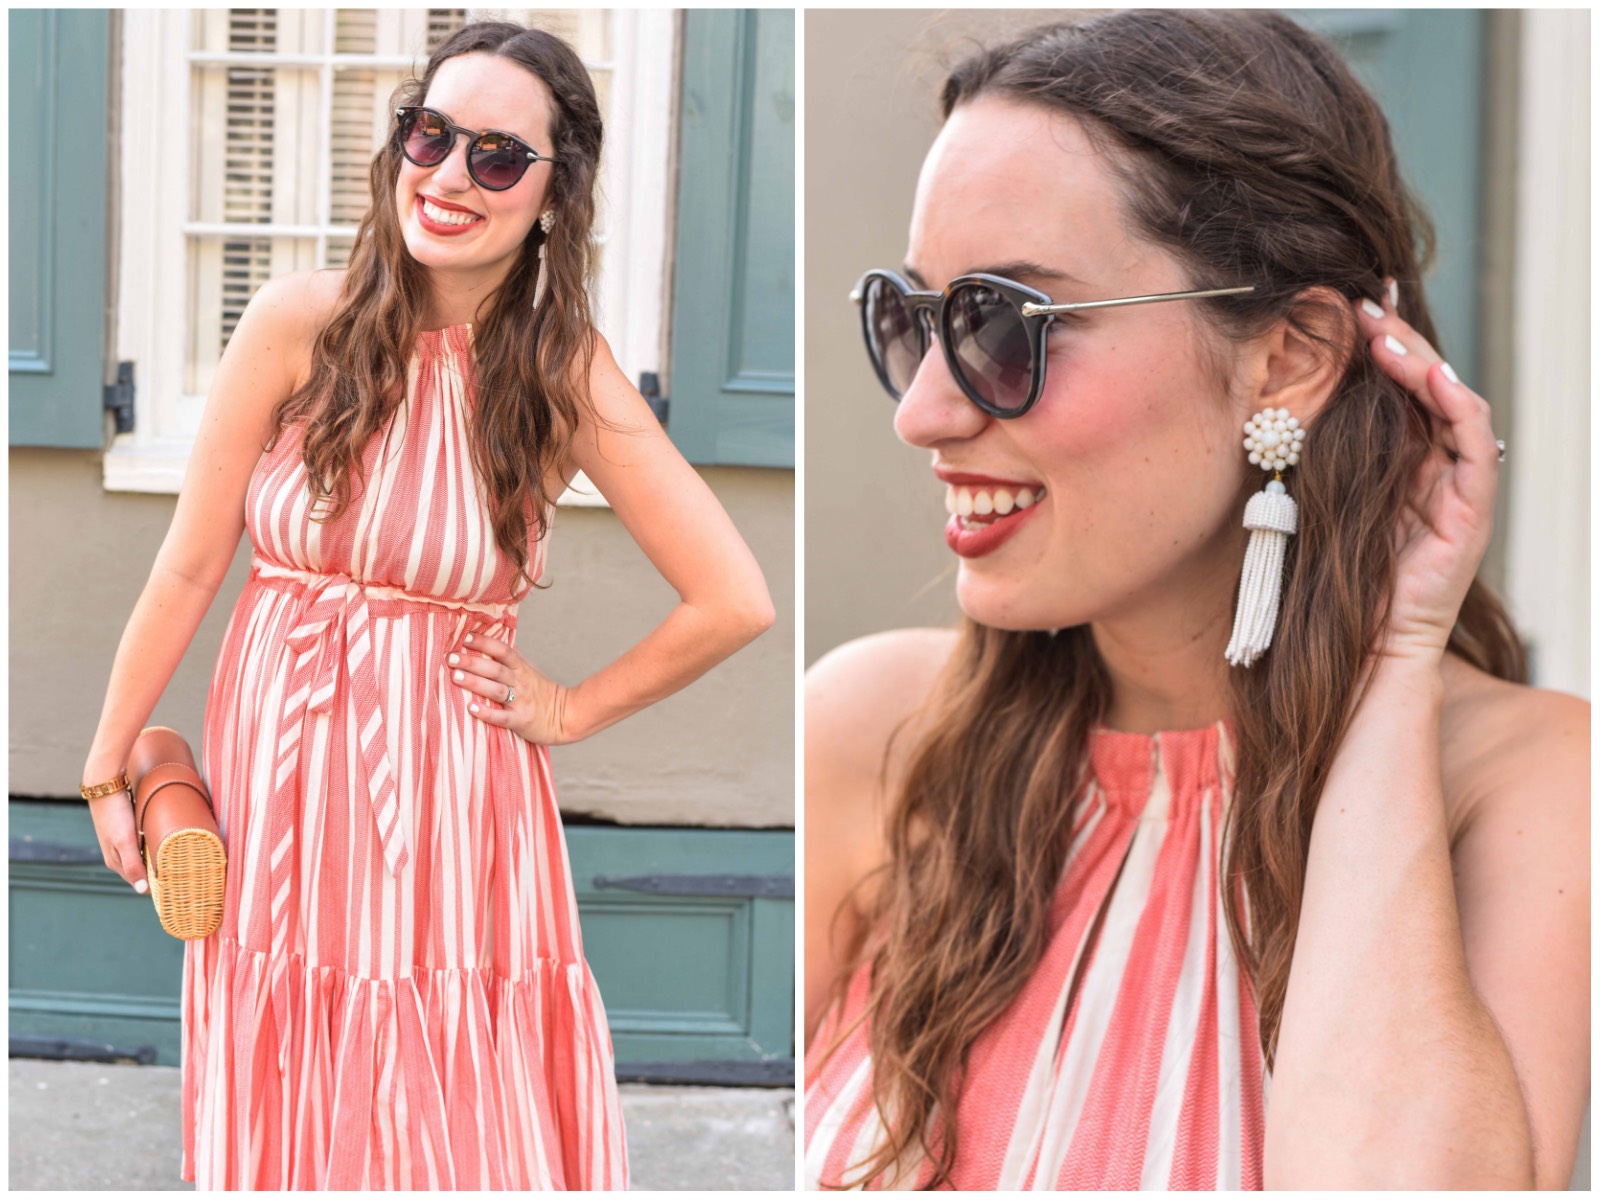 Accessorizing a red and white striped dress with white Lisi Lerch tassel earrings